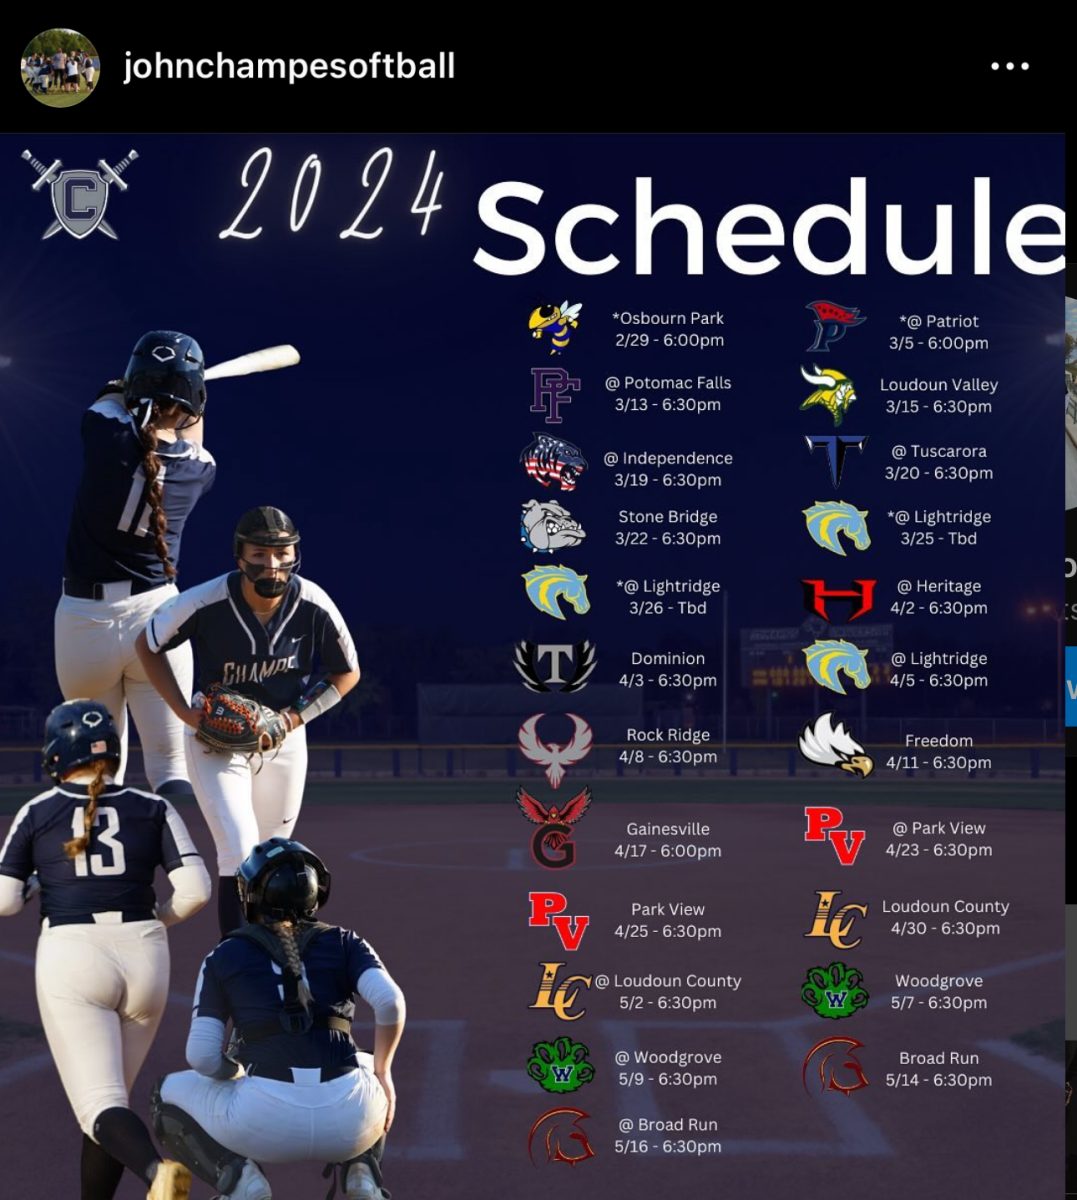 The John Champe softball team has their full season schedule up on Instagram for people to come out and support the team. They posted their schedule in January and have continued to update their feed leading up to this season. 